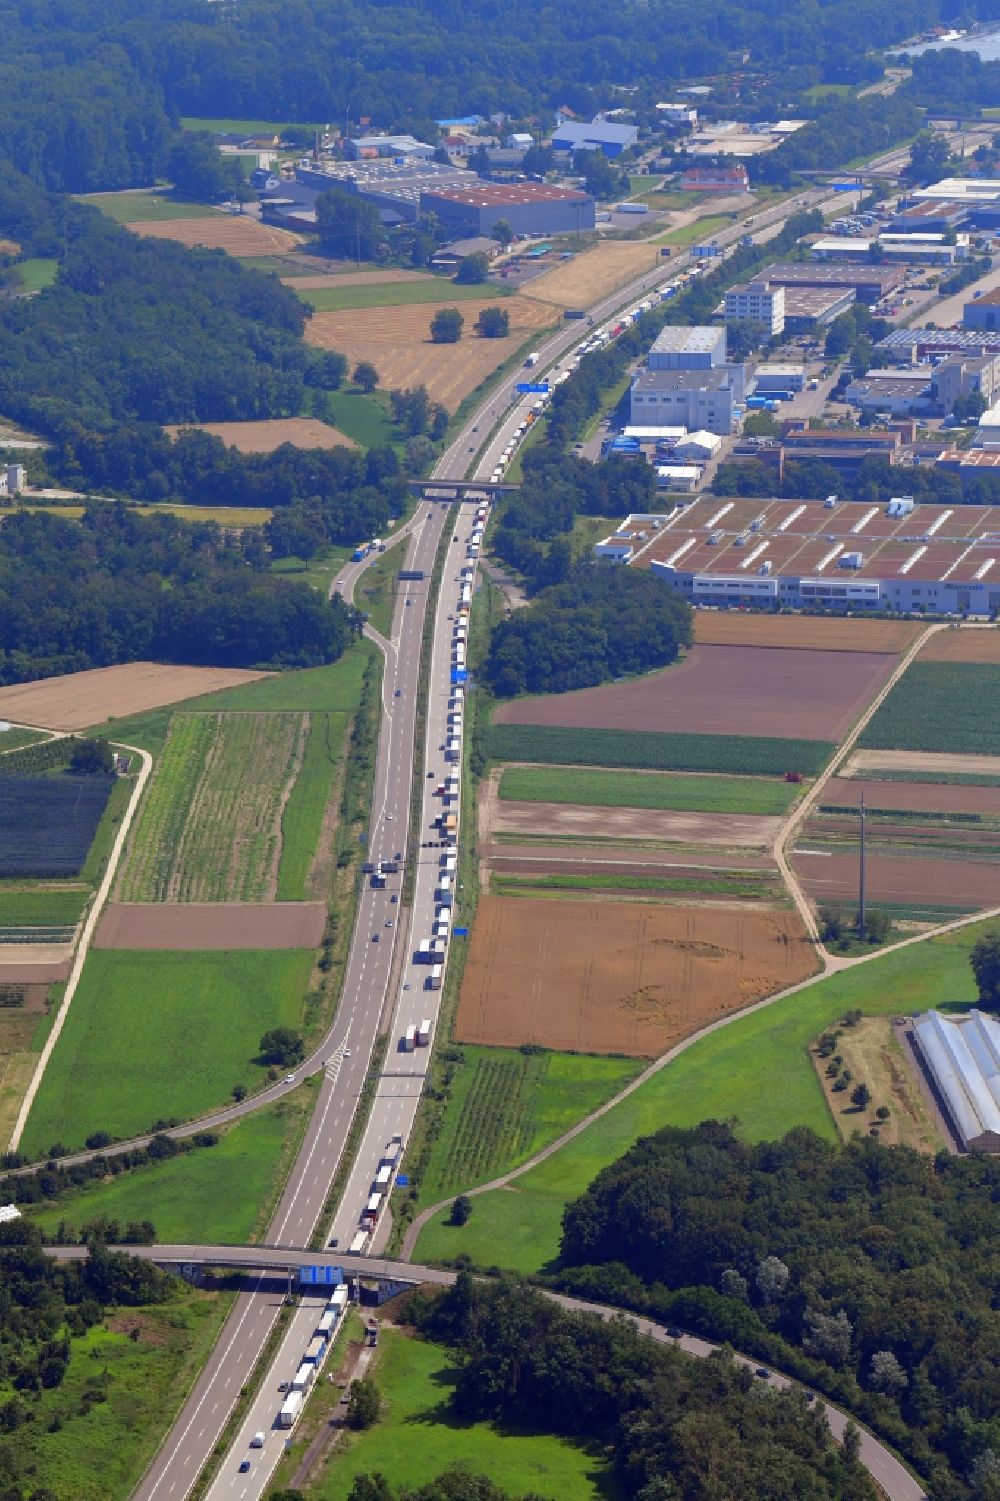 Weil am Rhein from above - Daily truck traffic jam at the Swiss border on highway triangle of the federal motorway A 5 / A98 in the district Maerkt in Weil am Rhein in the state Baden-Wurttemberg, Germany